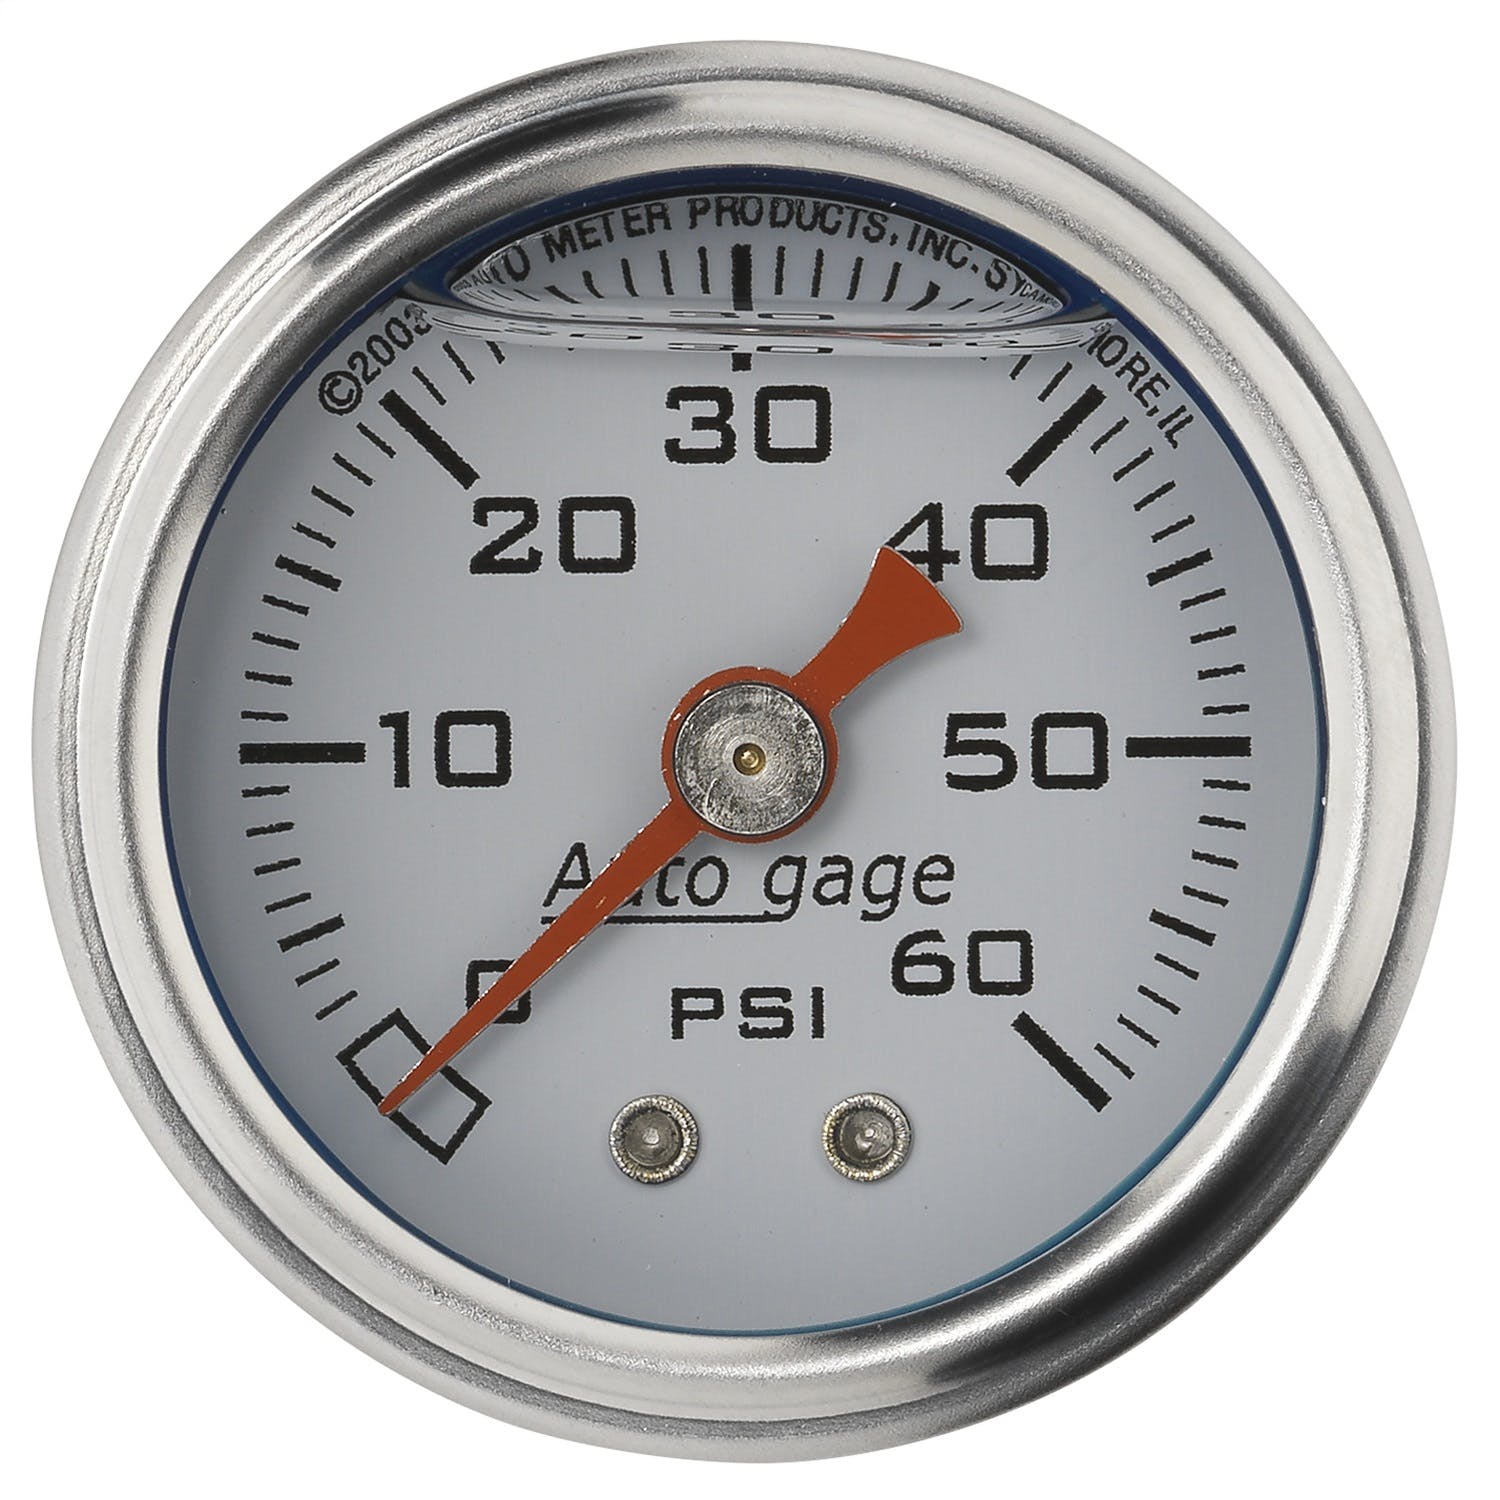 AutoMeter Products 2176 Auto Gage Series Dampened-Movement Pressure Gauge (White, 0-60 PSI, 1-1/2 in.)